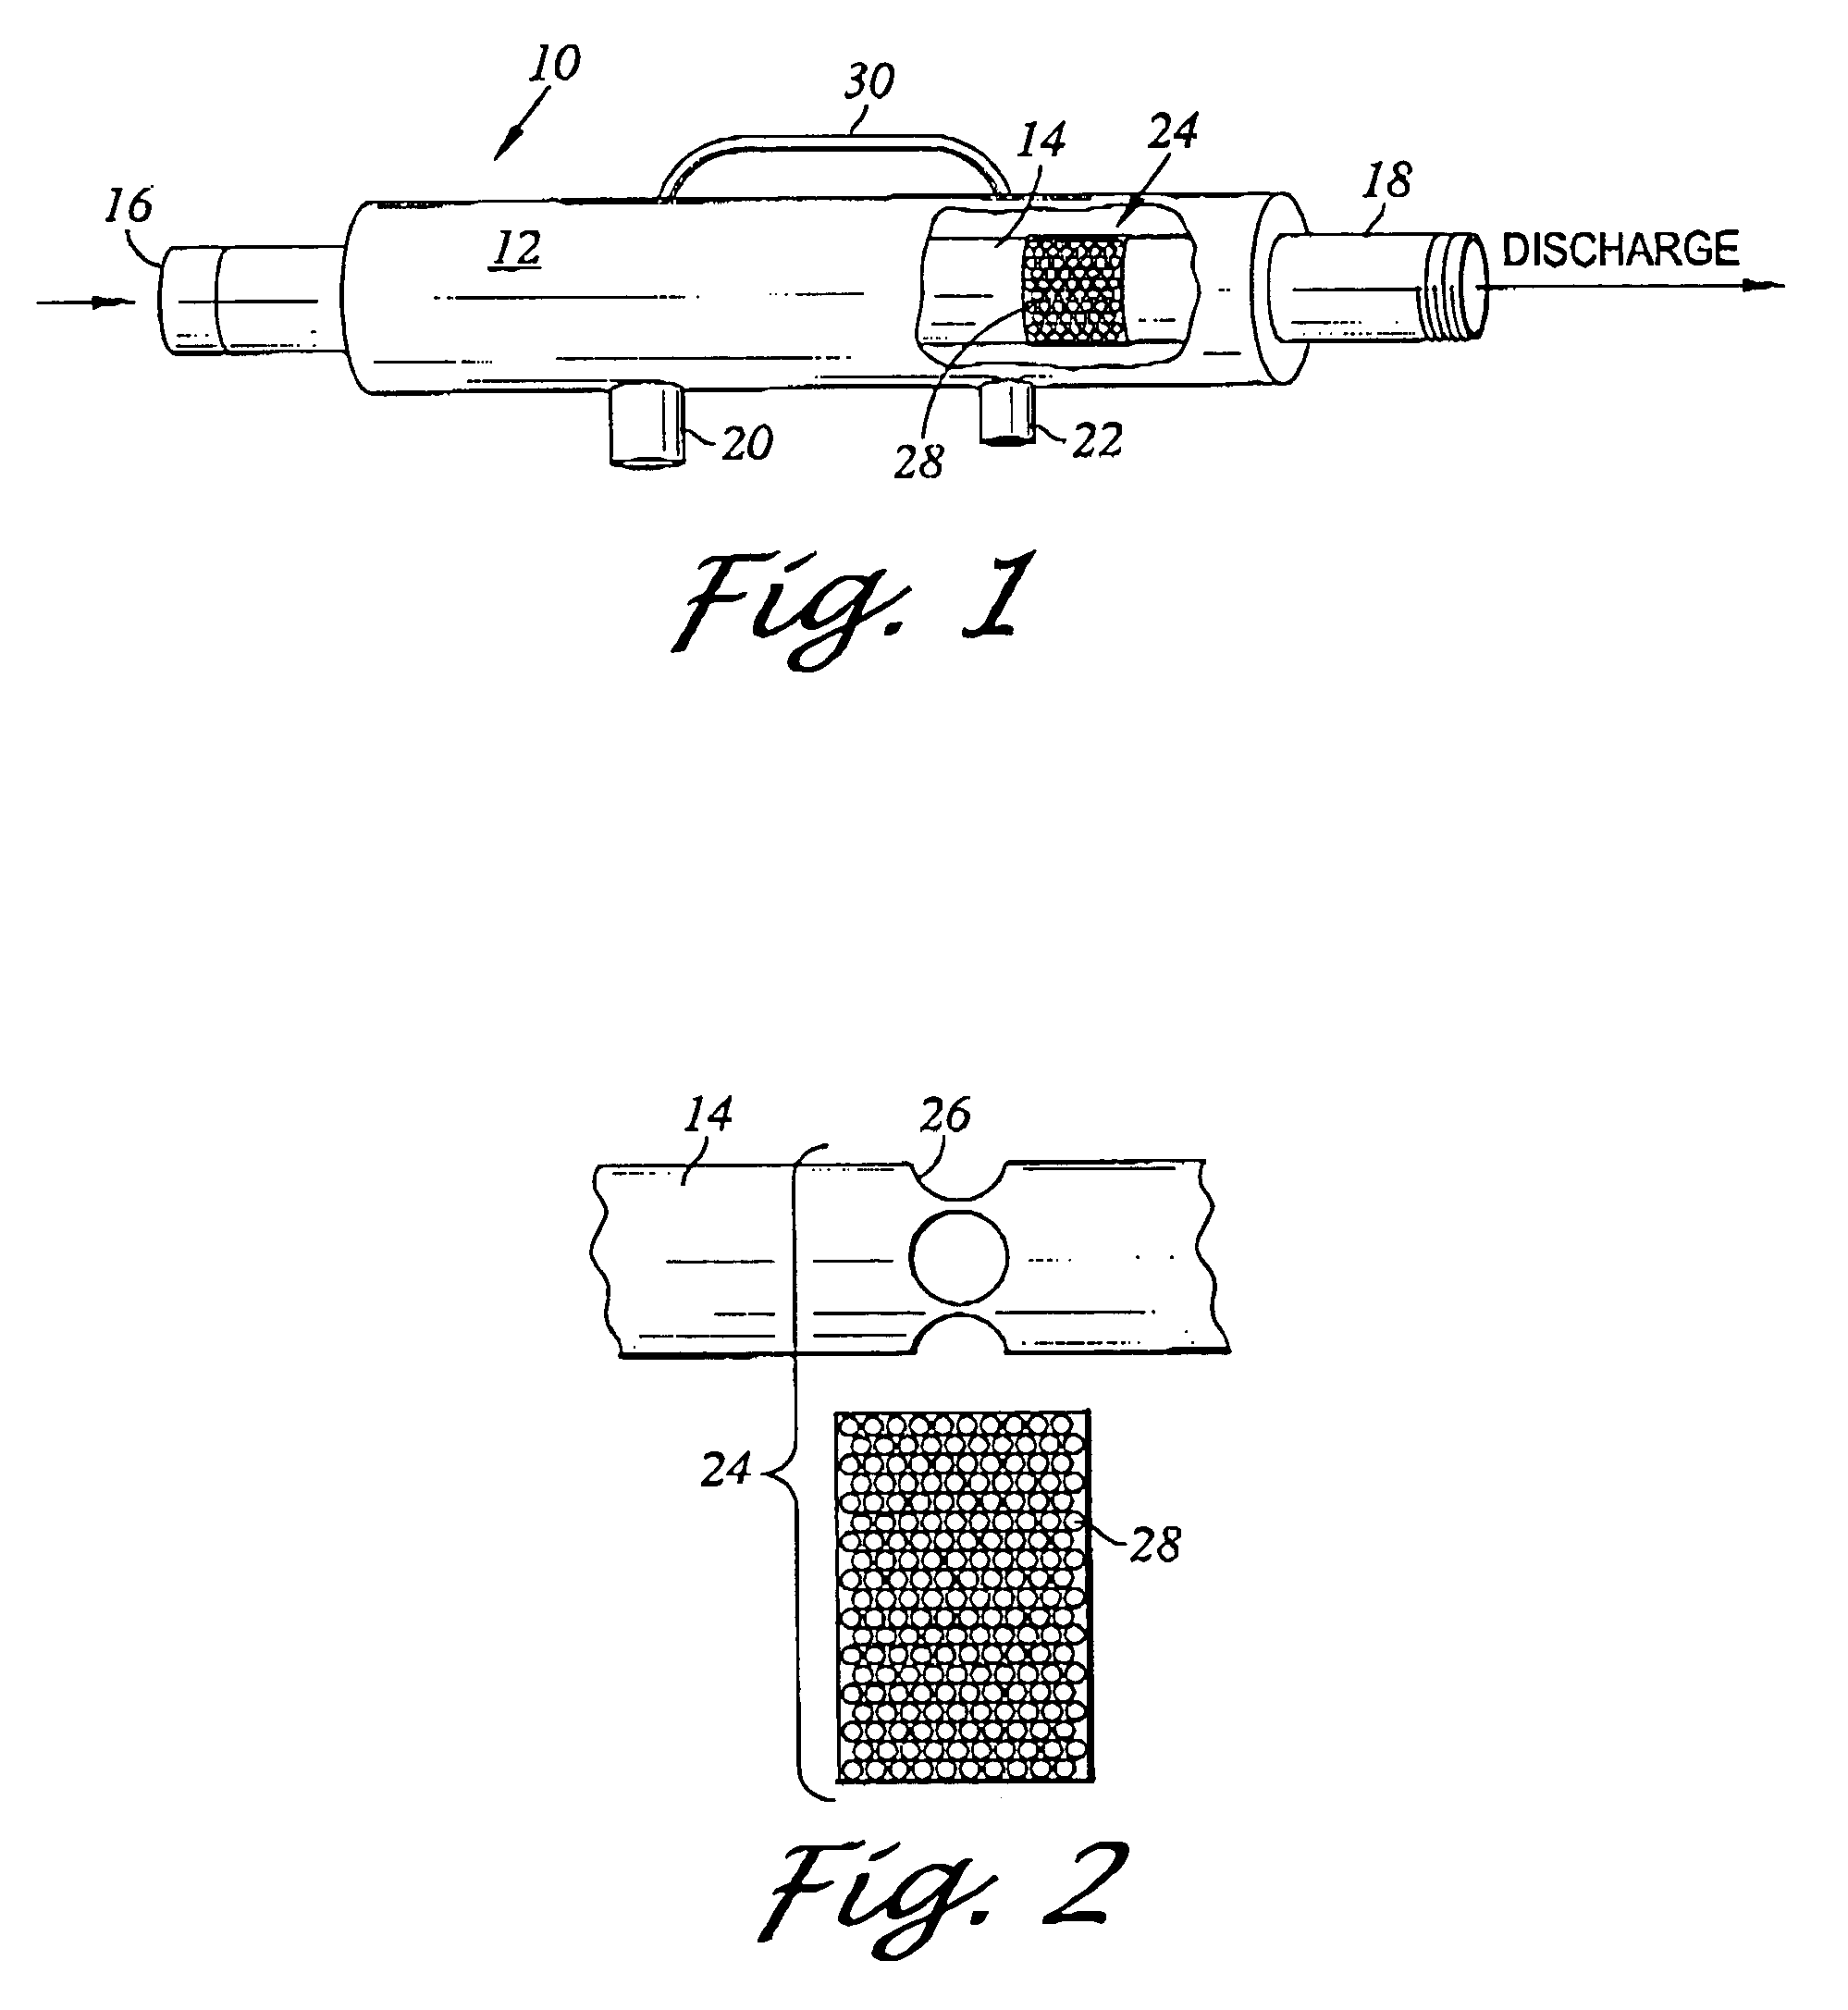 Method and apparatus for fighting fires in confined areas